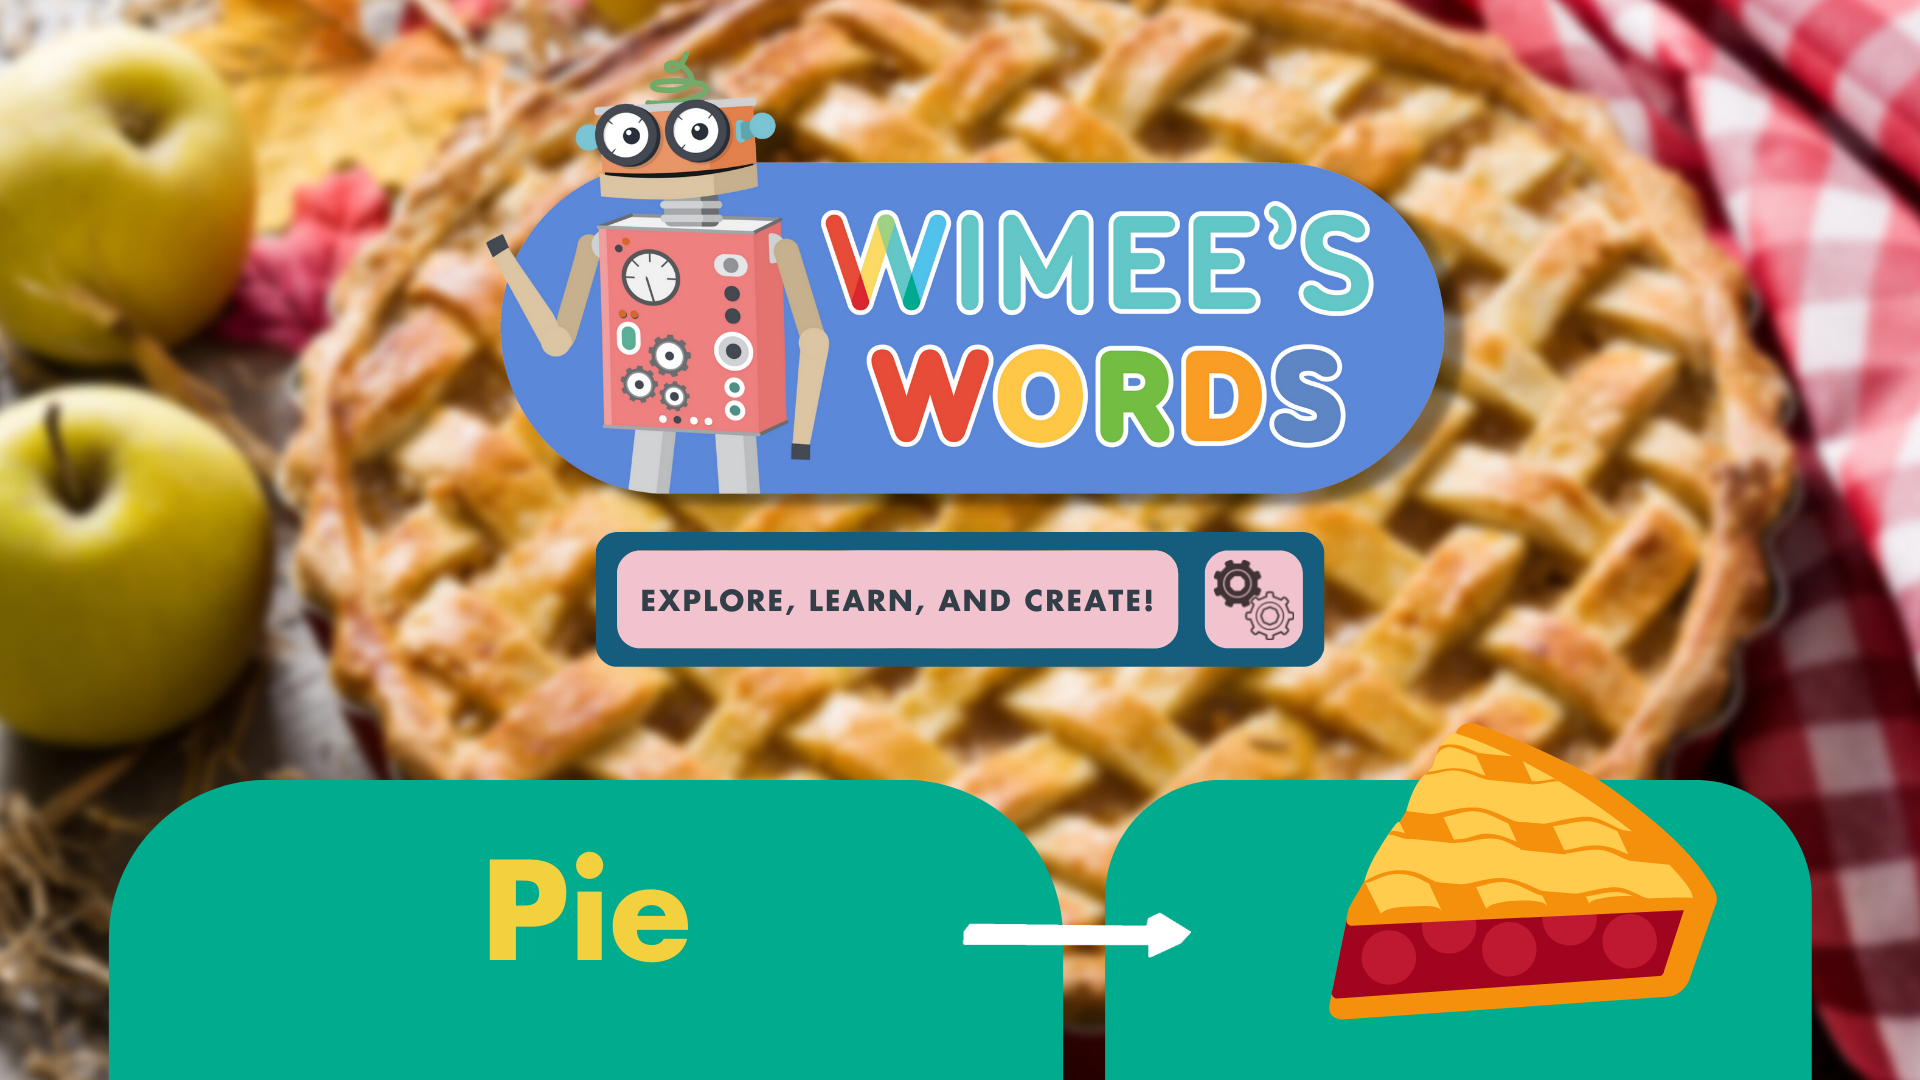 An out-of-focus photo of an apple pie in the background with the Wimee's Words logo, a graphic of a slice of cherry pie, and the title "Pie" are over the image.